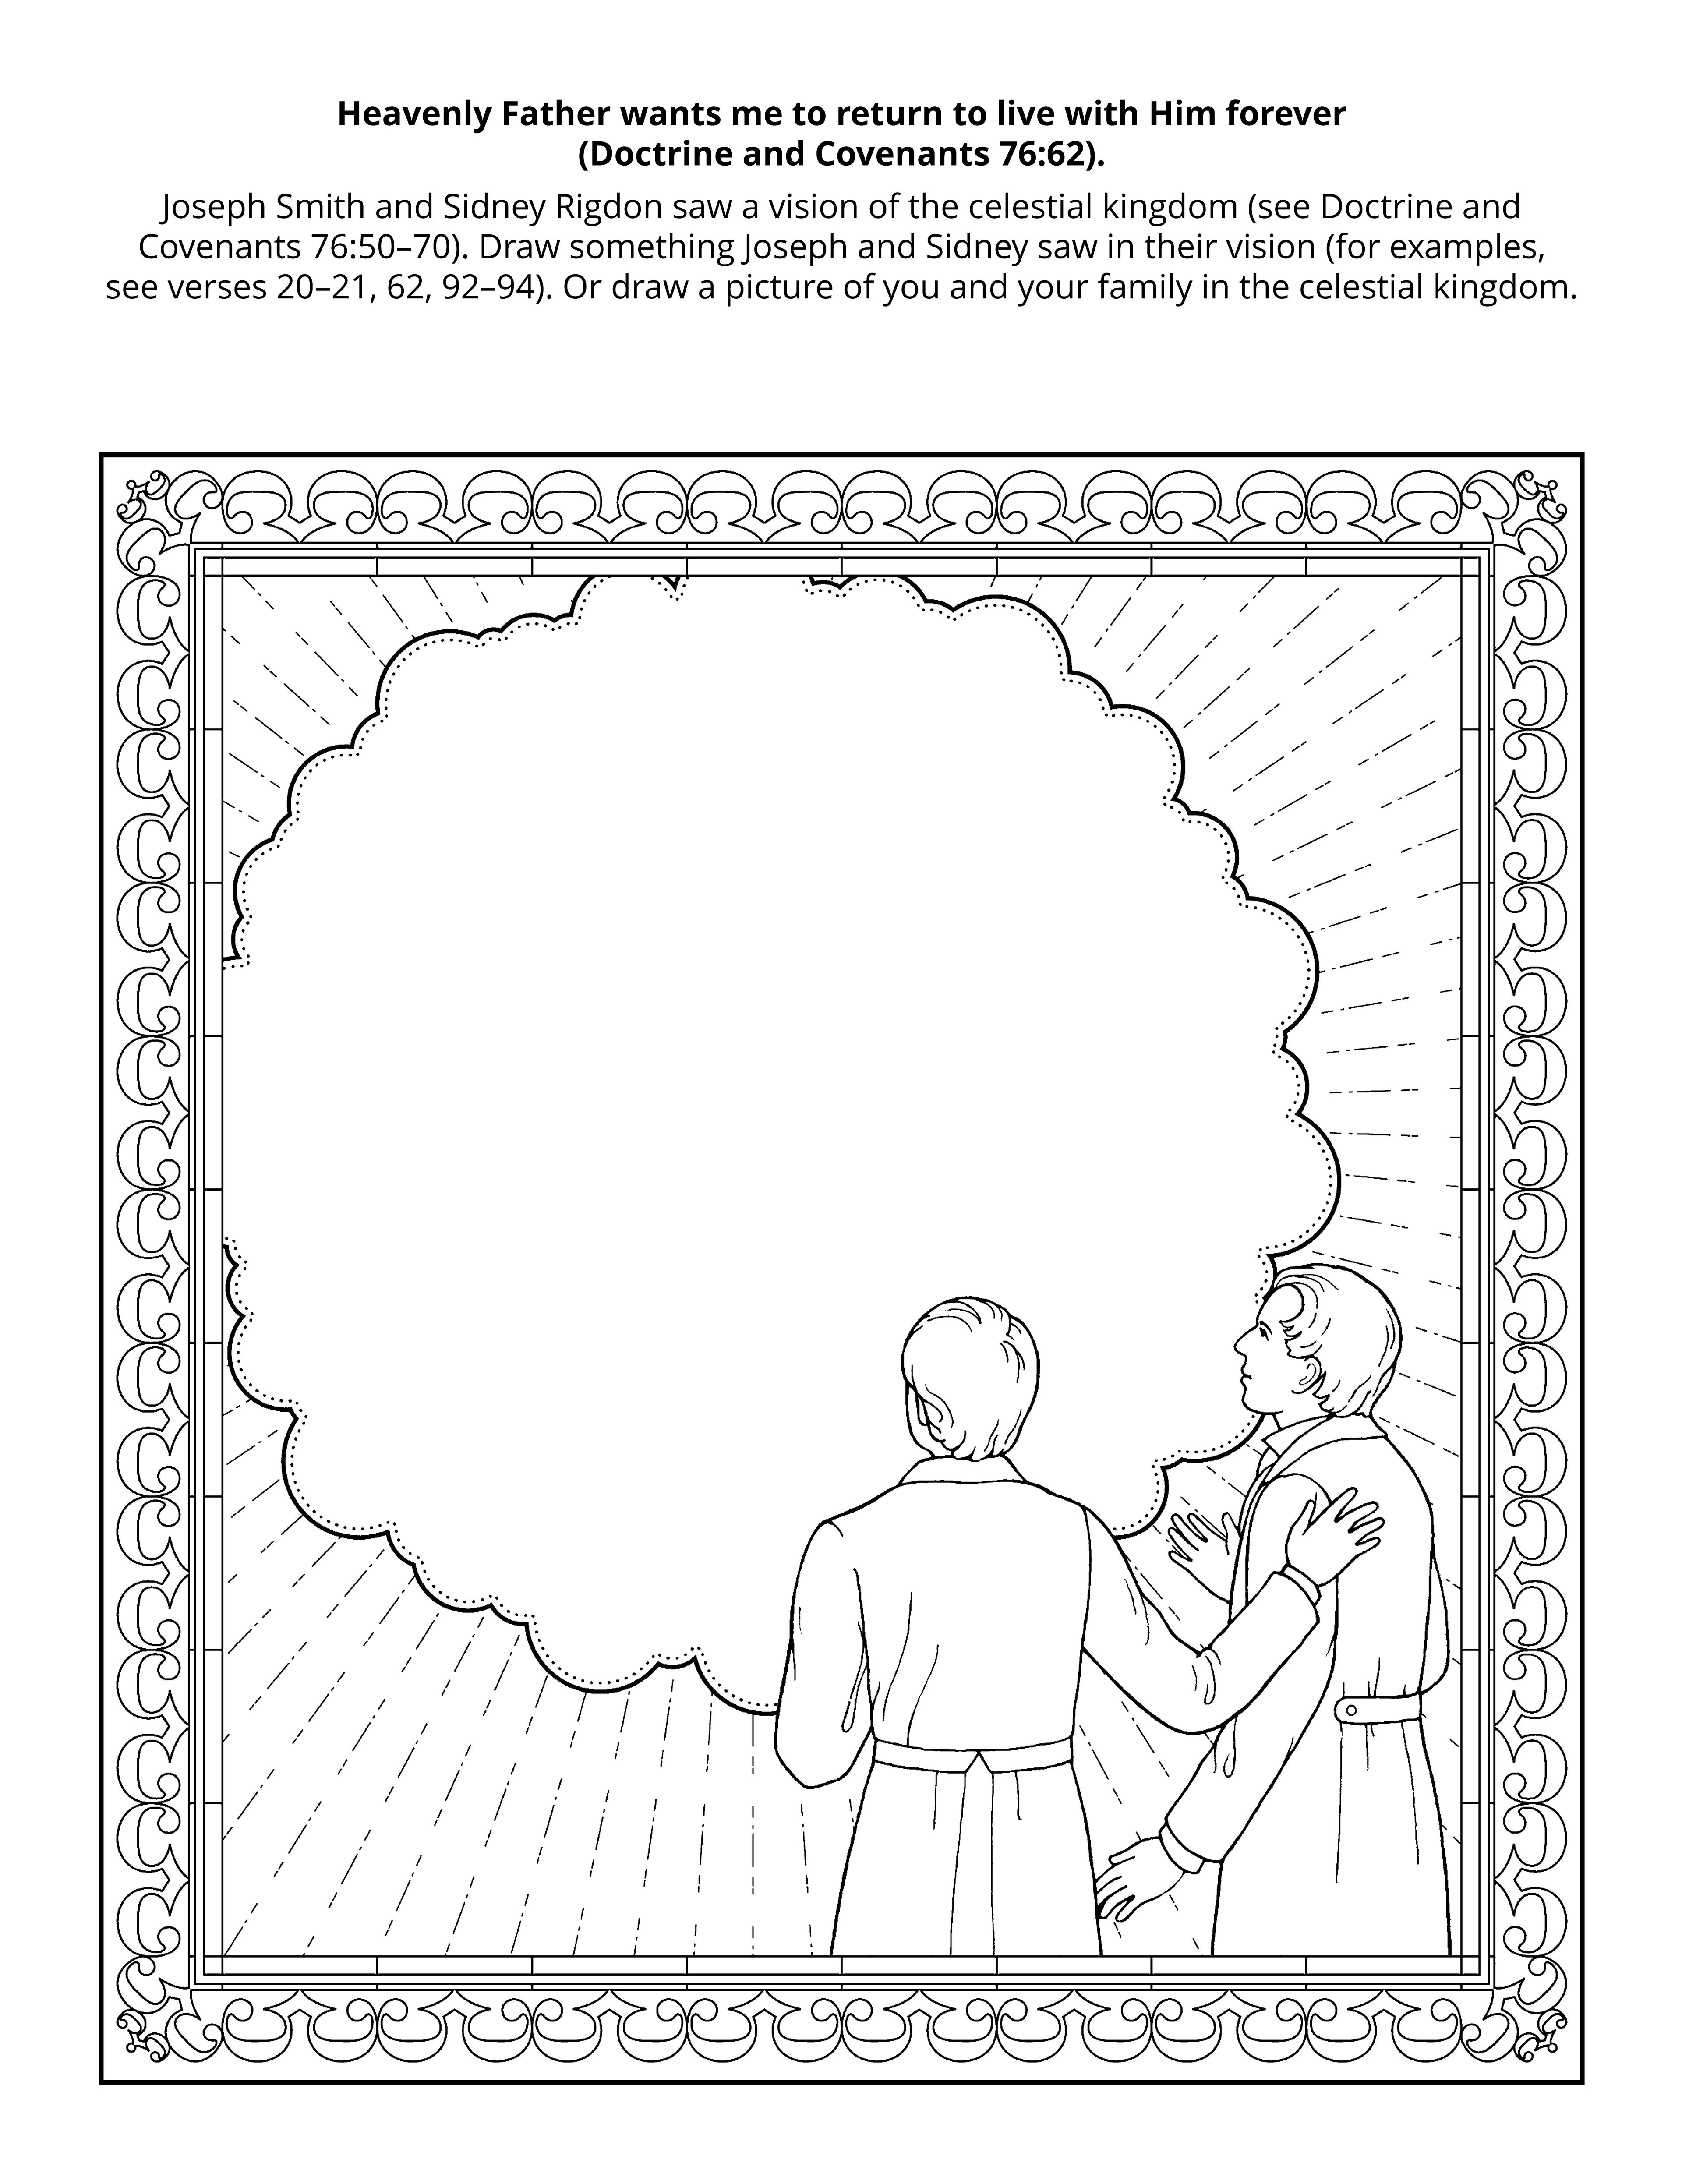 Line art picture depicts Joseph Smith and Sidney Rigdon in vision.